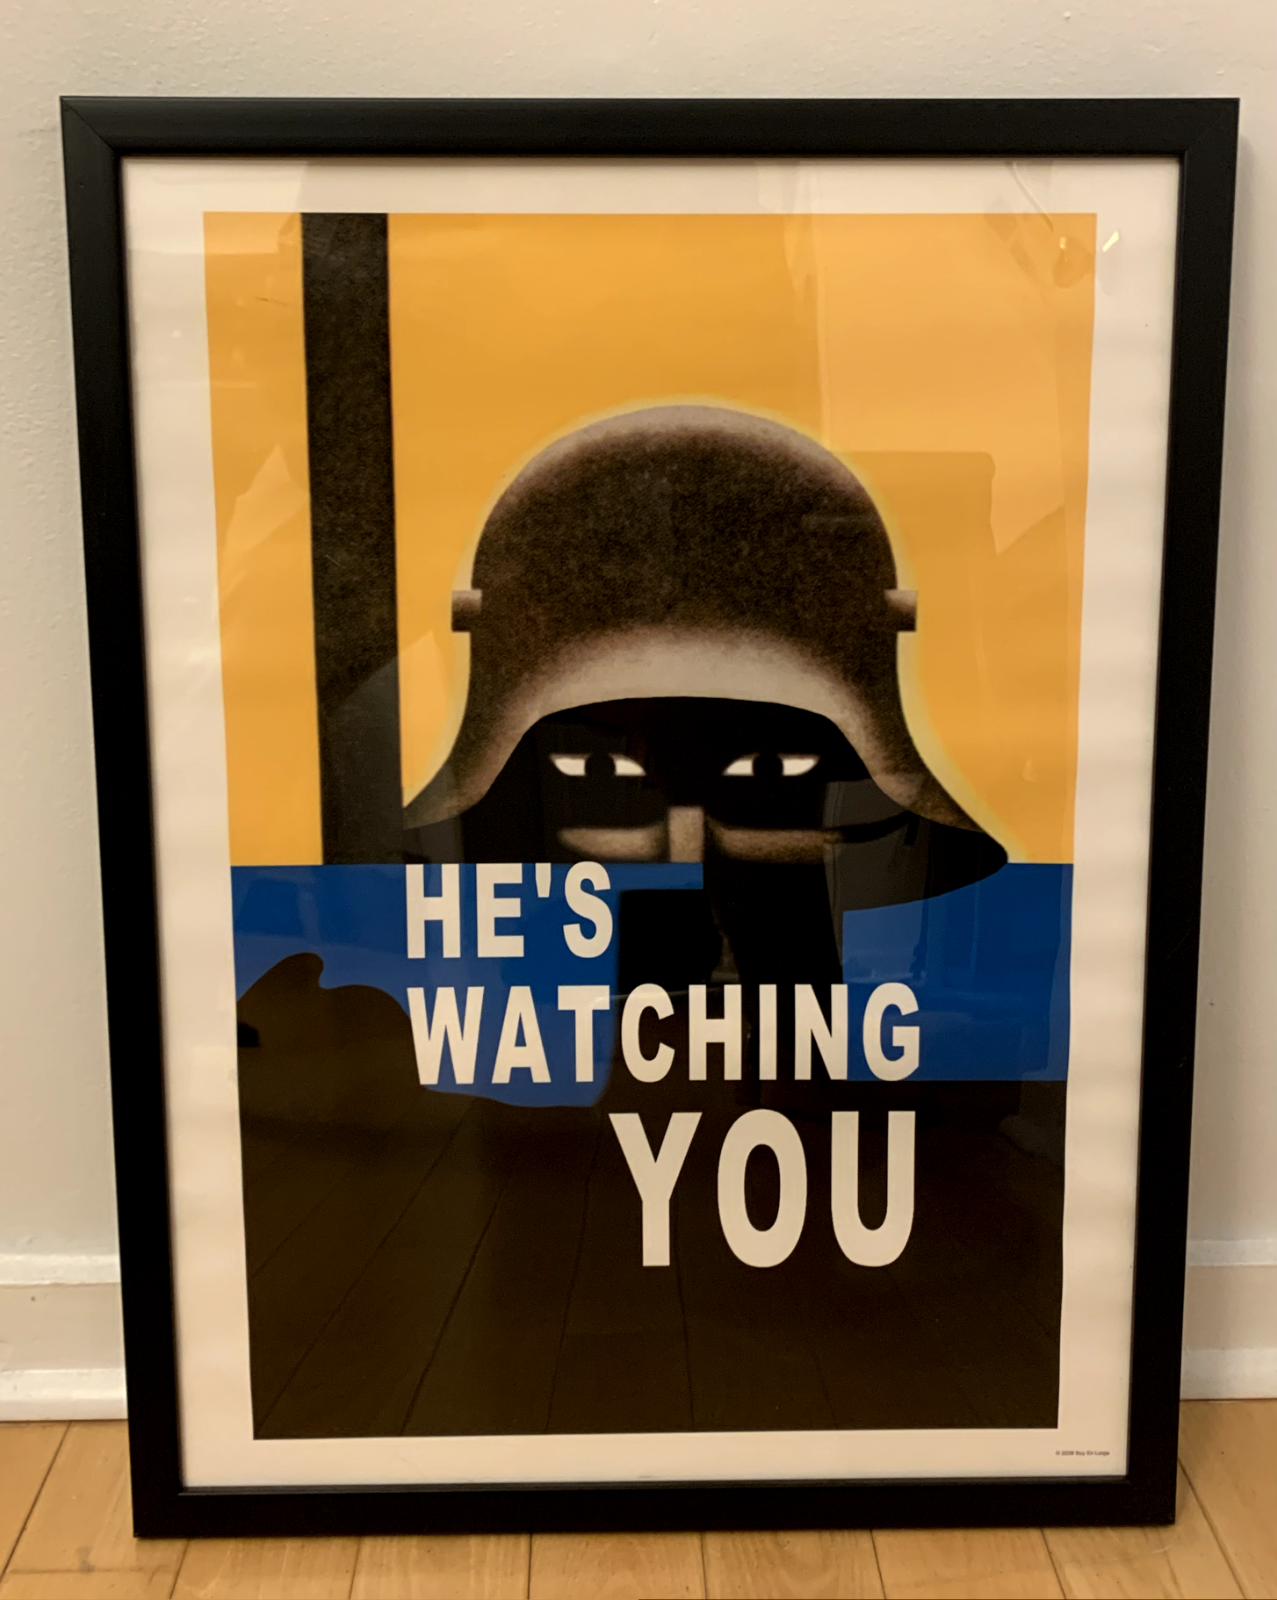 US WWII Framed Poster 'He's Watching You' Vintage Art Print - 19"x25" Без бренда